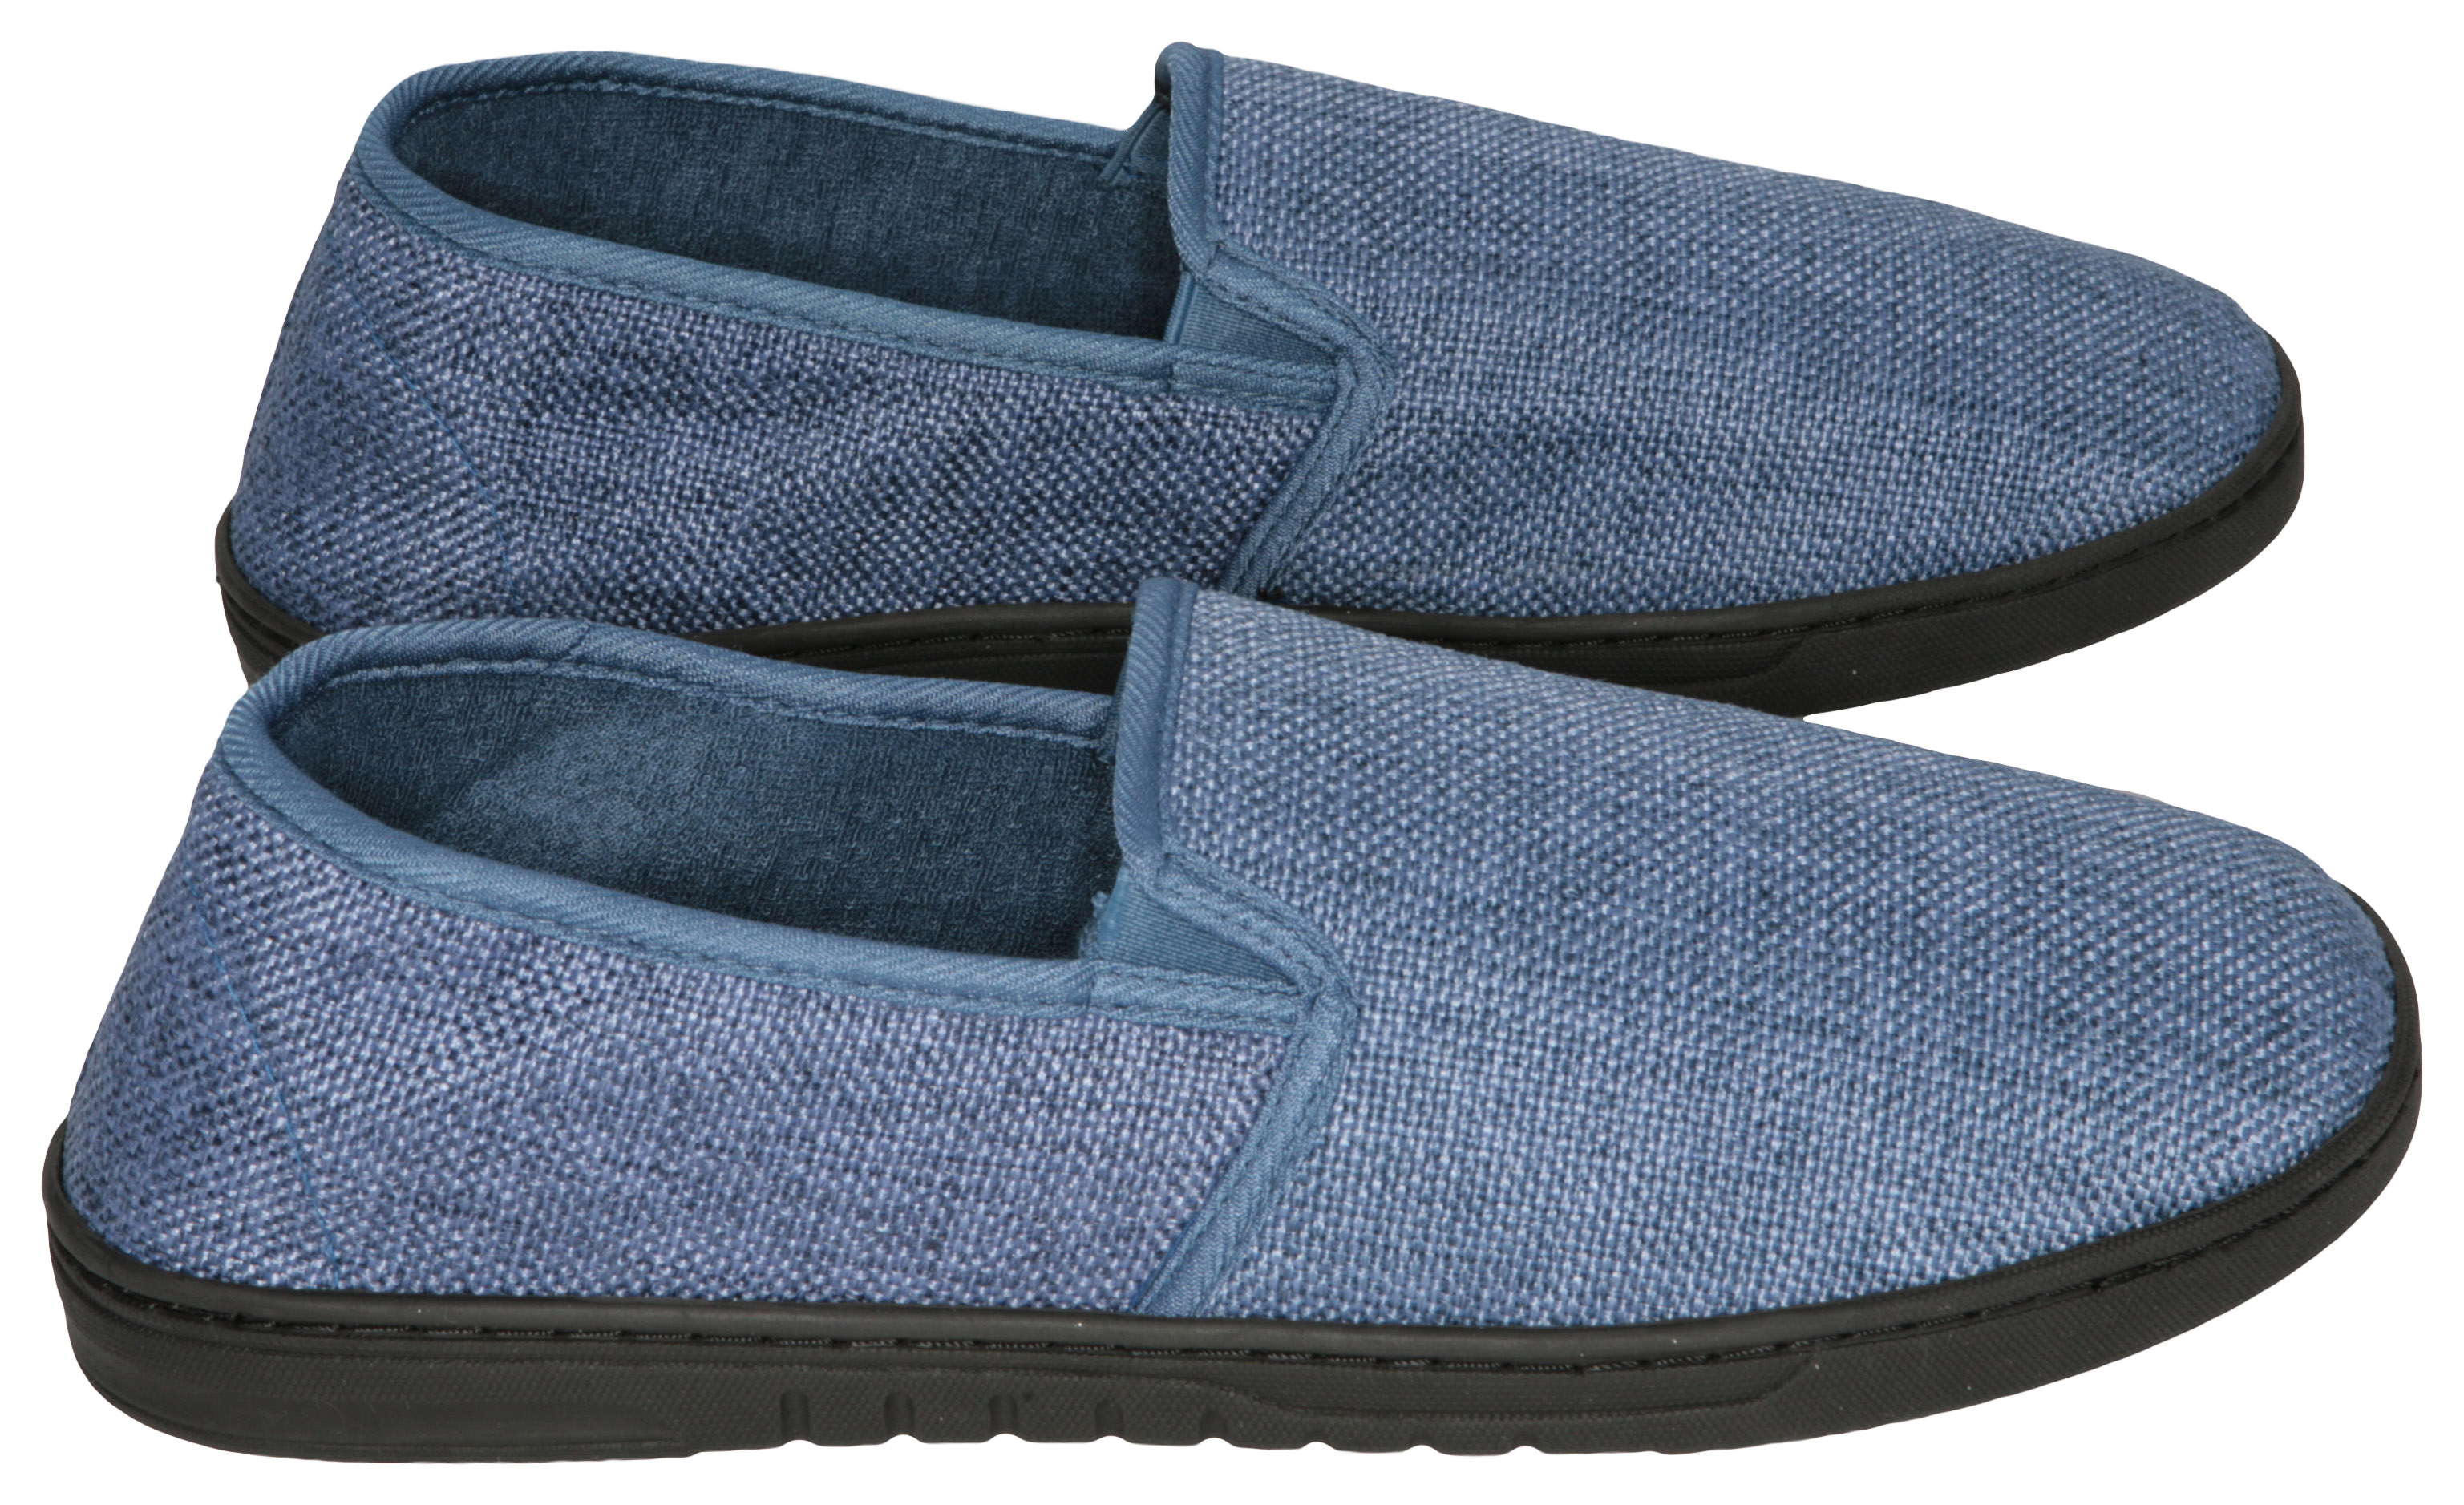 Deluxe Comfort Men's Memory Foam Slipper, Size 9-10 – Soft Linen 120D SBR Insole and Rubber Outsole – Pure Suede Shoes – Non-Marking Sole – Men's Slippers, Blue - image 2 of 5